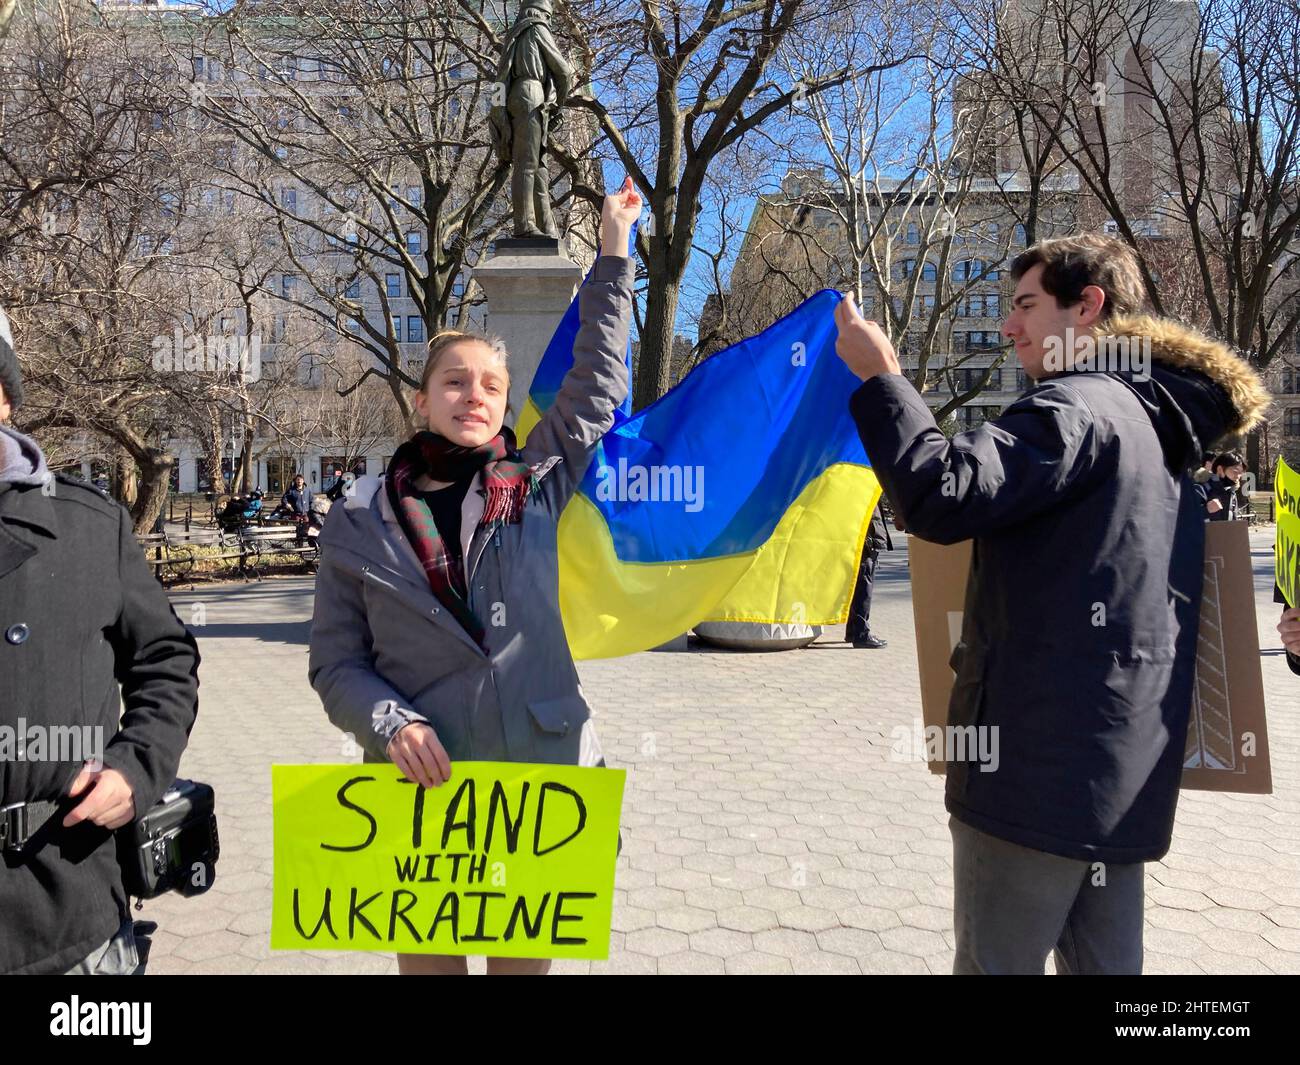 Ukrainian-Americans and their supporters protest the Russian invasion and show support for the citizens of the Ukraine, in Washington Square Park in New York on Sunday, February 27, 2022. (© Frances M. Roberts) Stock Photo